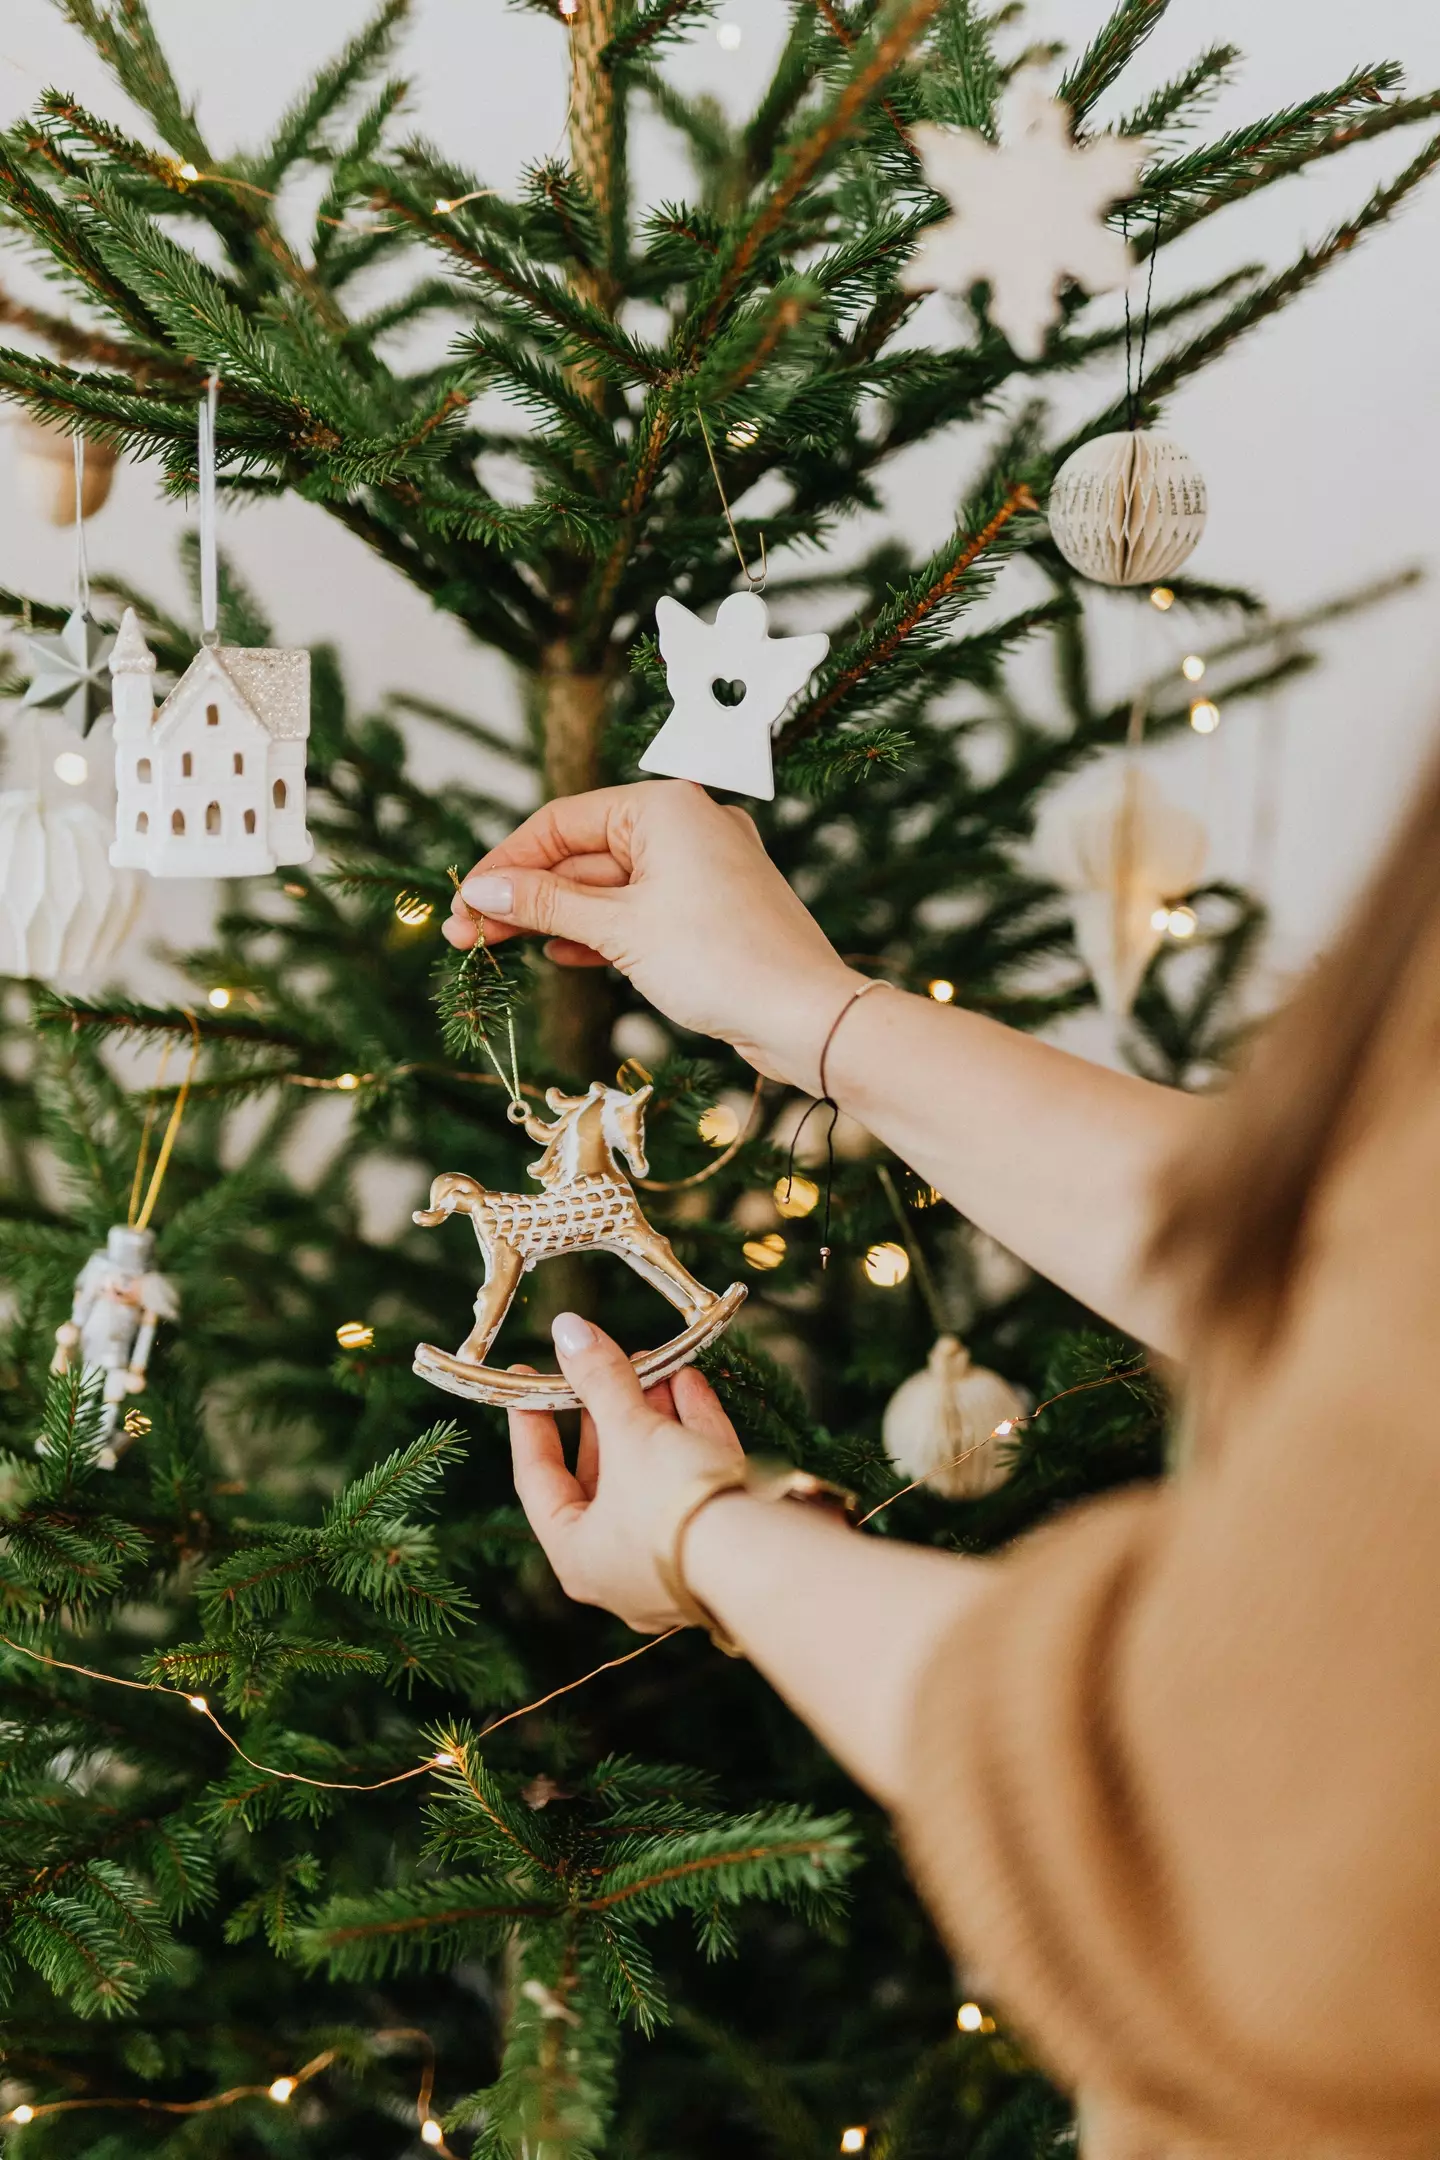 Once the deep cleaning tasks are done, you can focus on decorating and getting your house feeling festive ready for the big day.